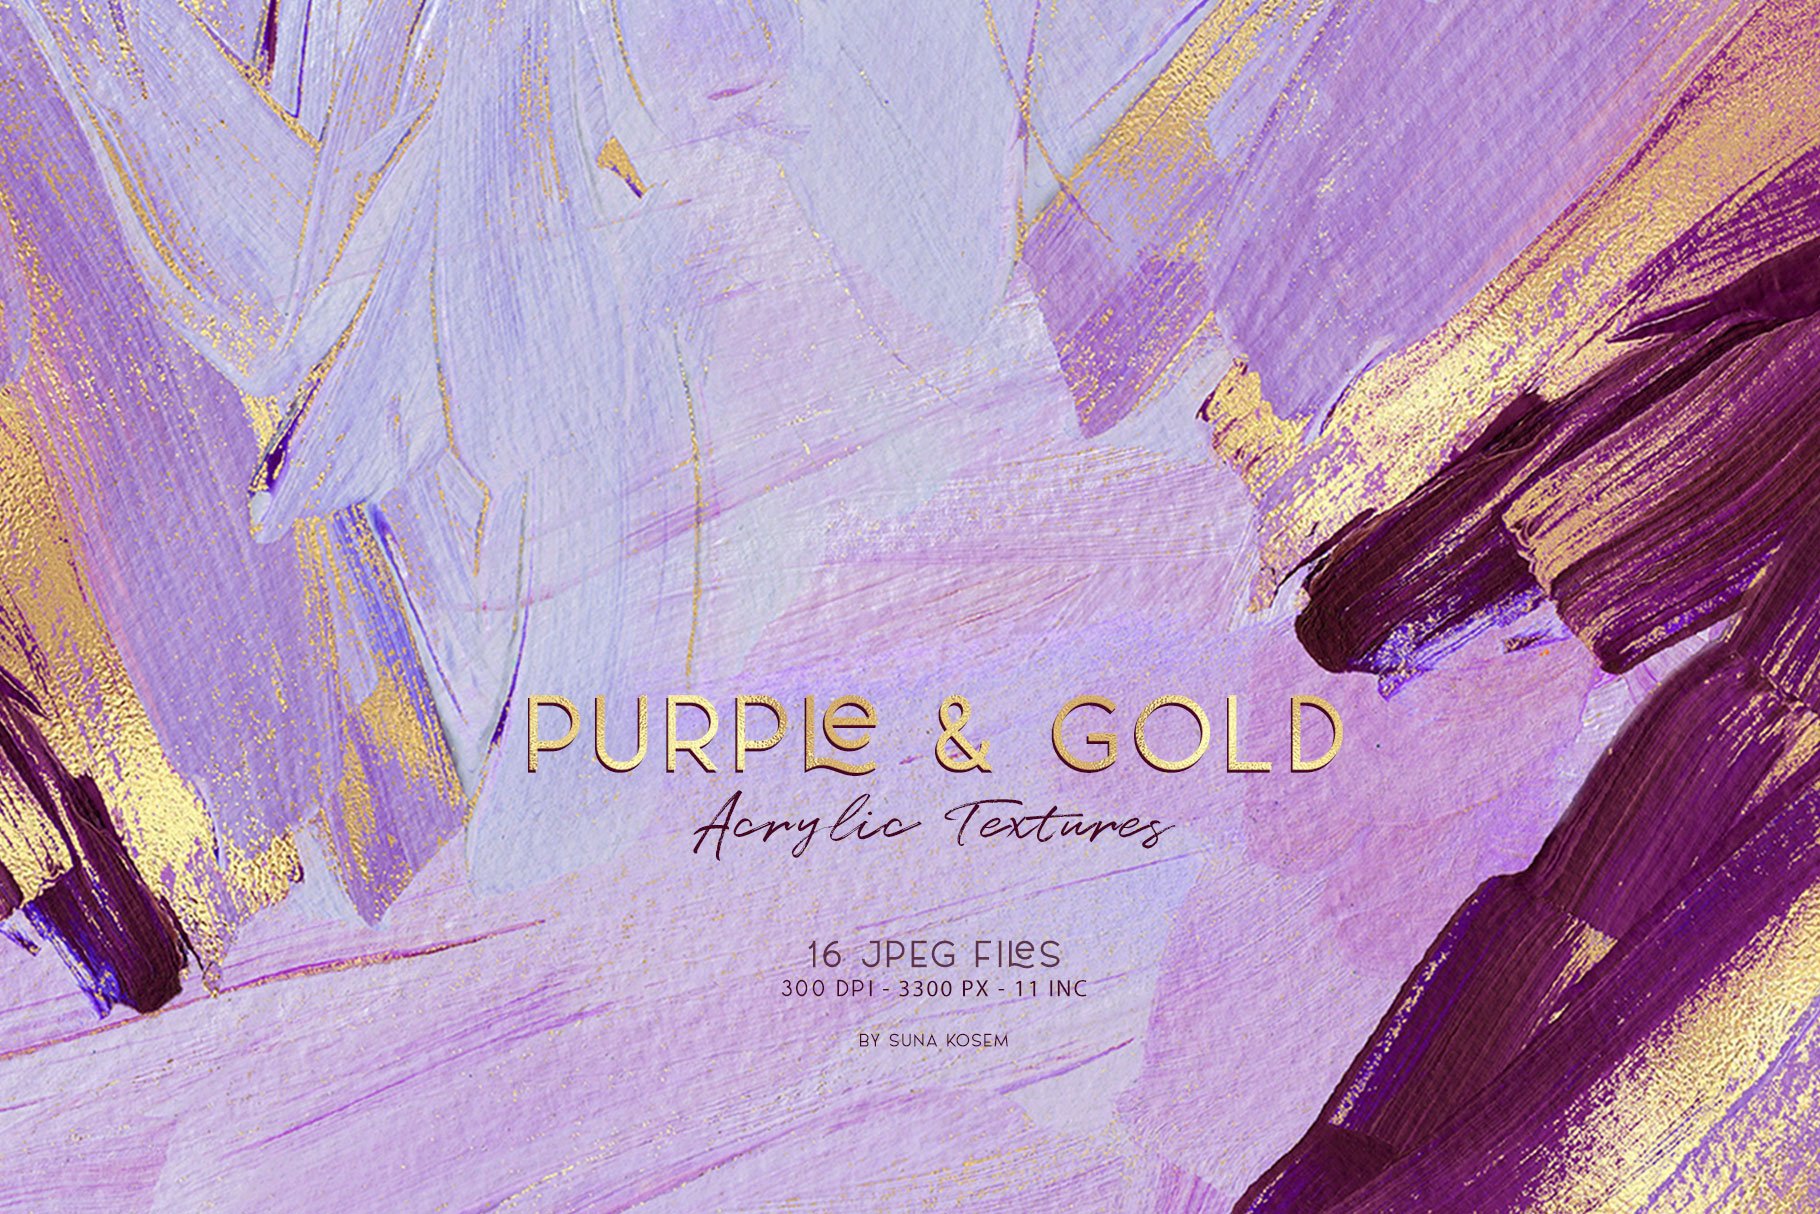 Purple & Gold Acrylic Textures cover image.